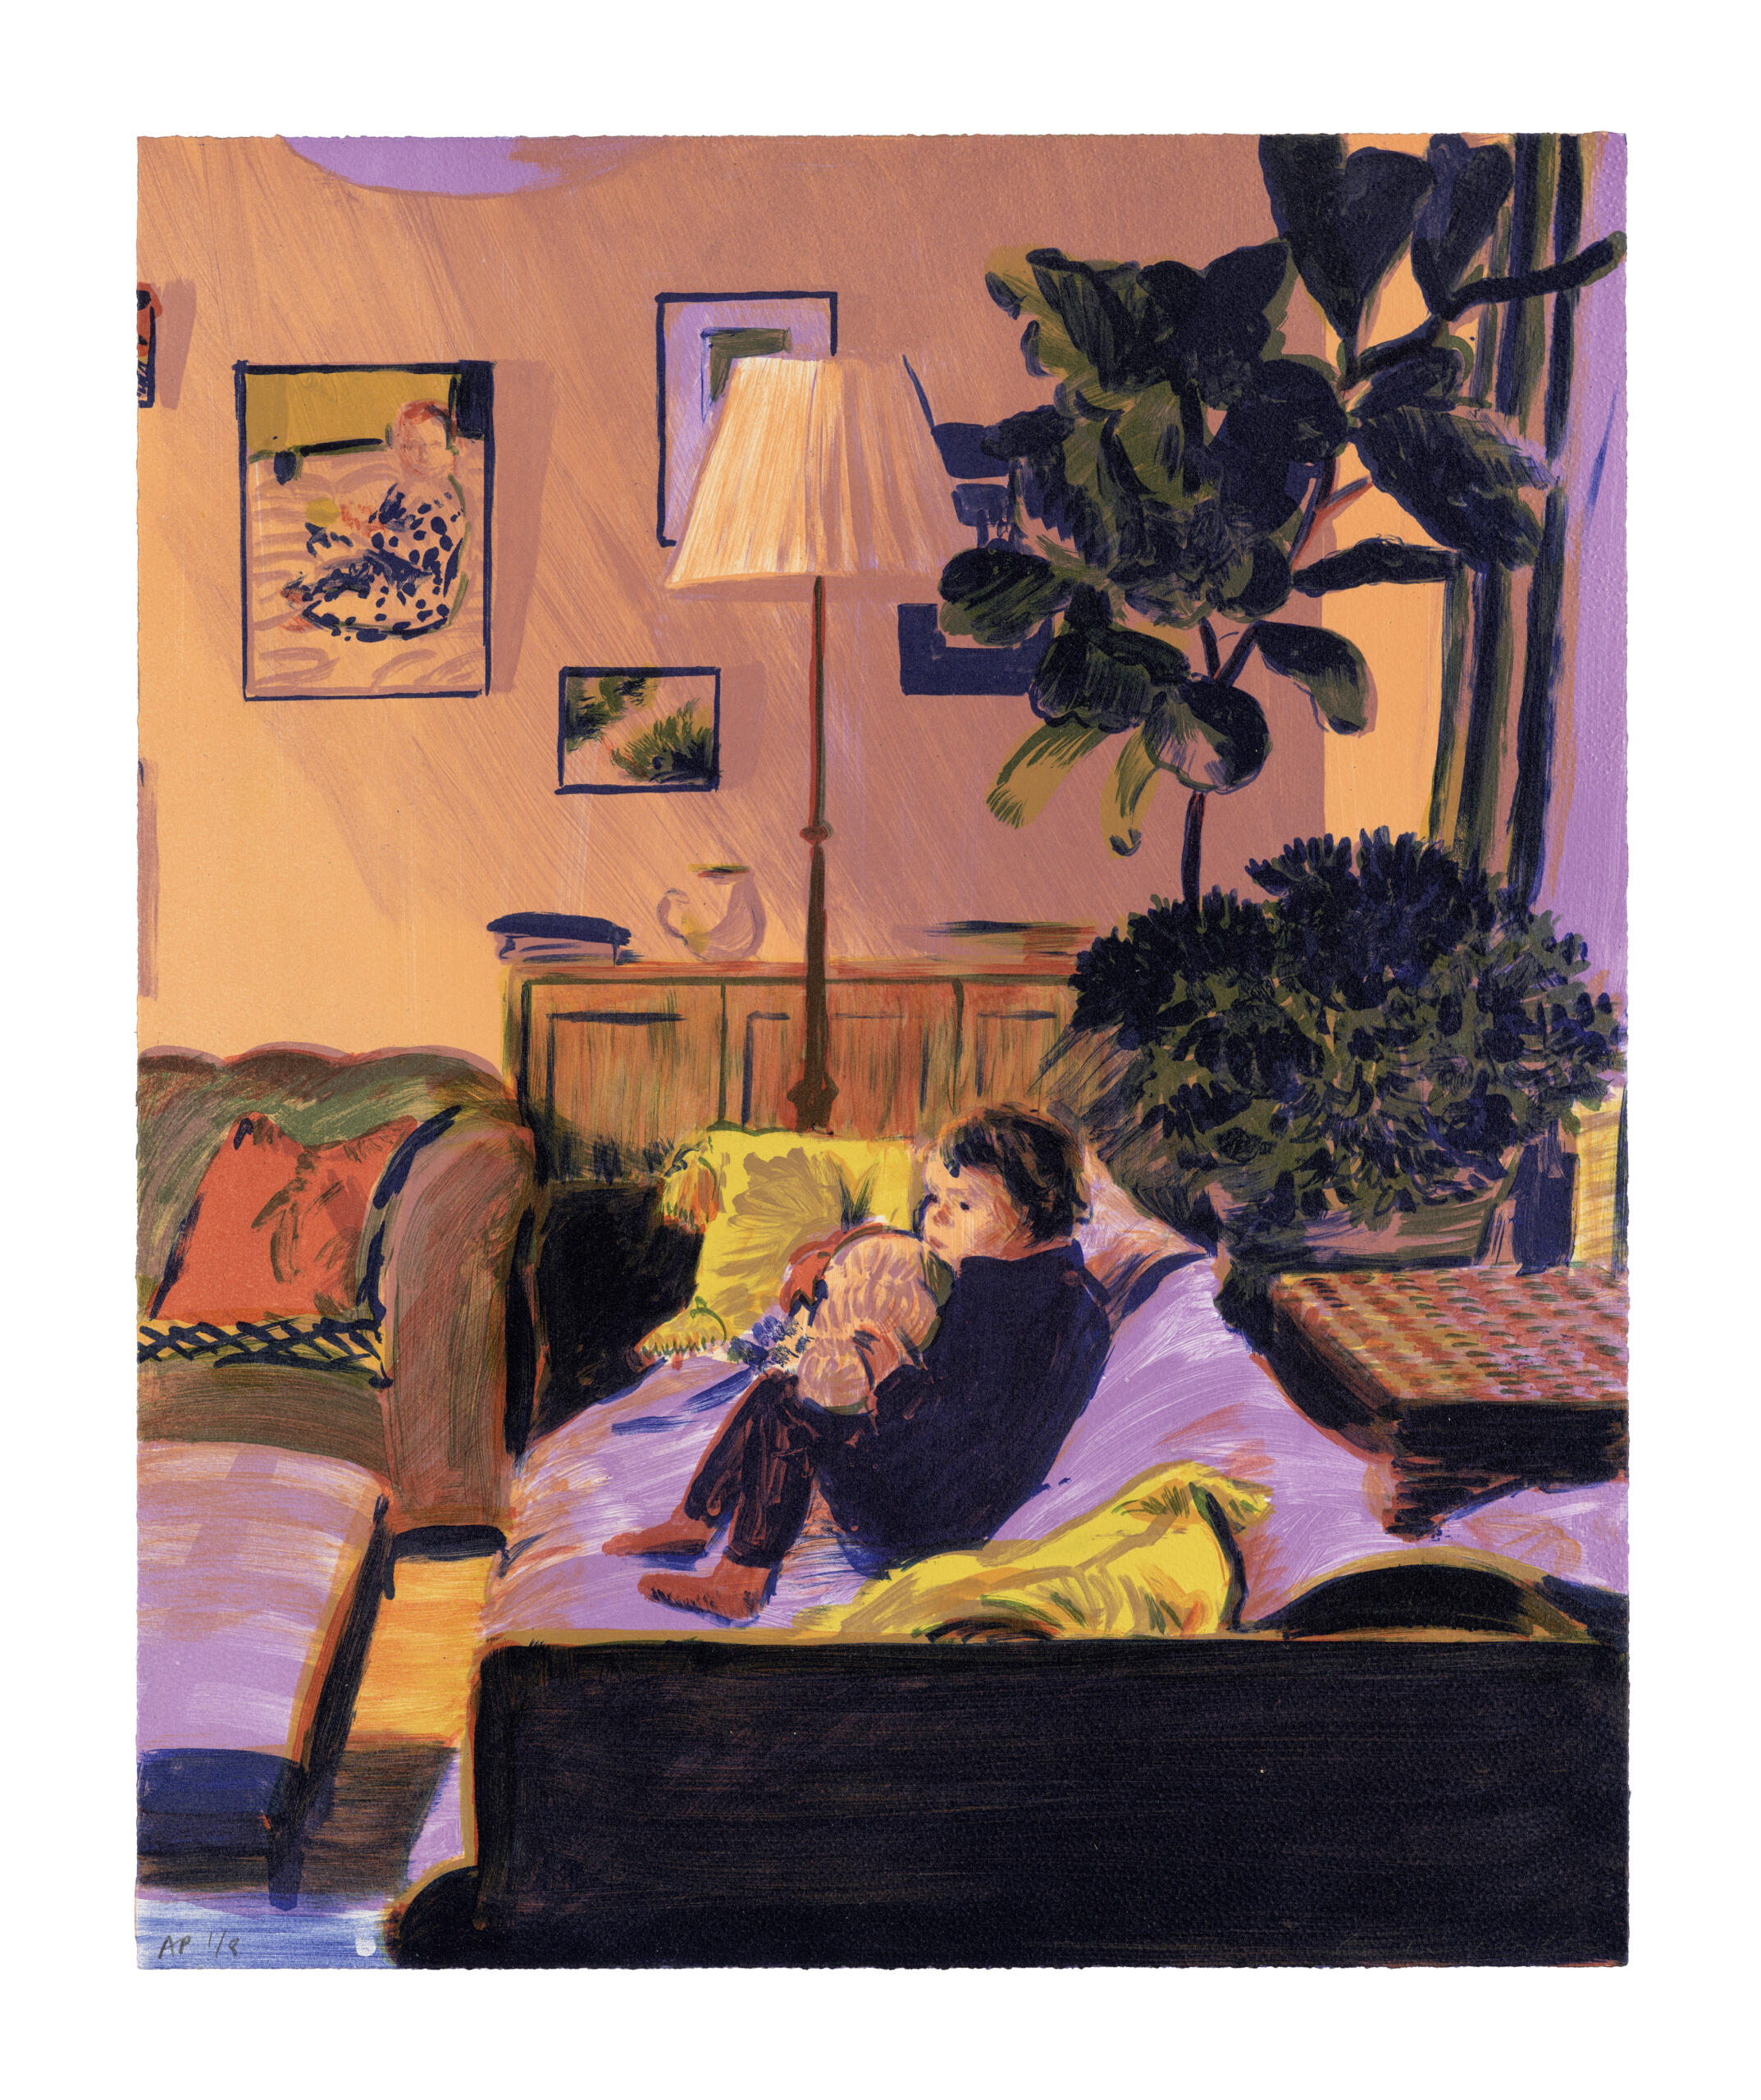 LOWRES_Twilight_2023_Lithograph_53 x 43cm